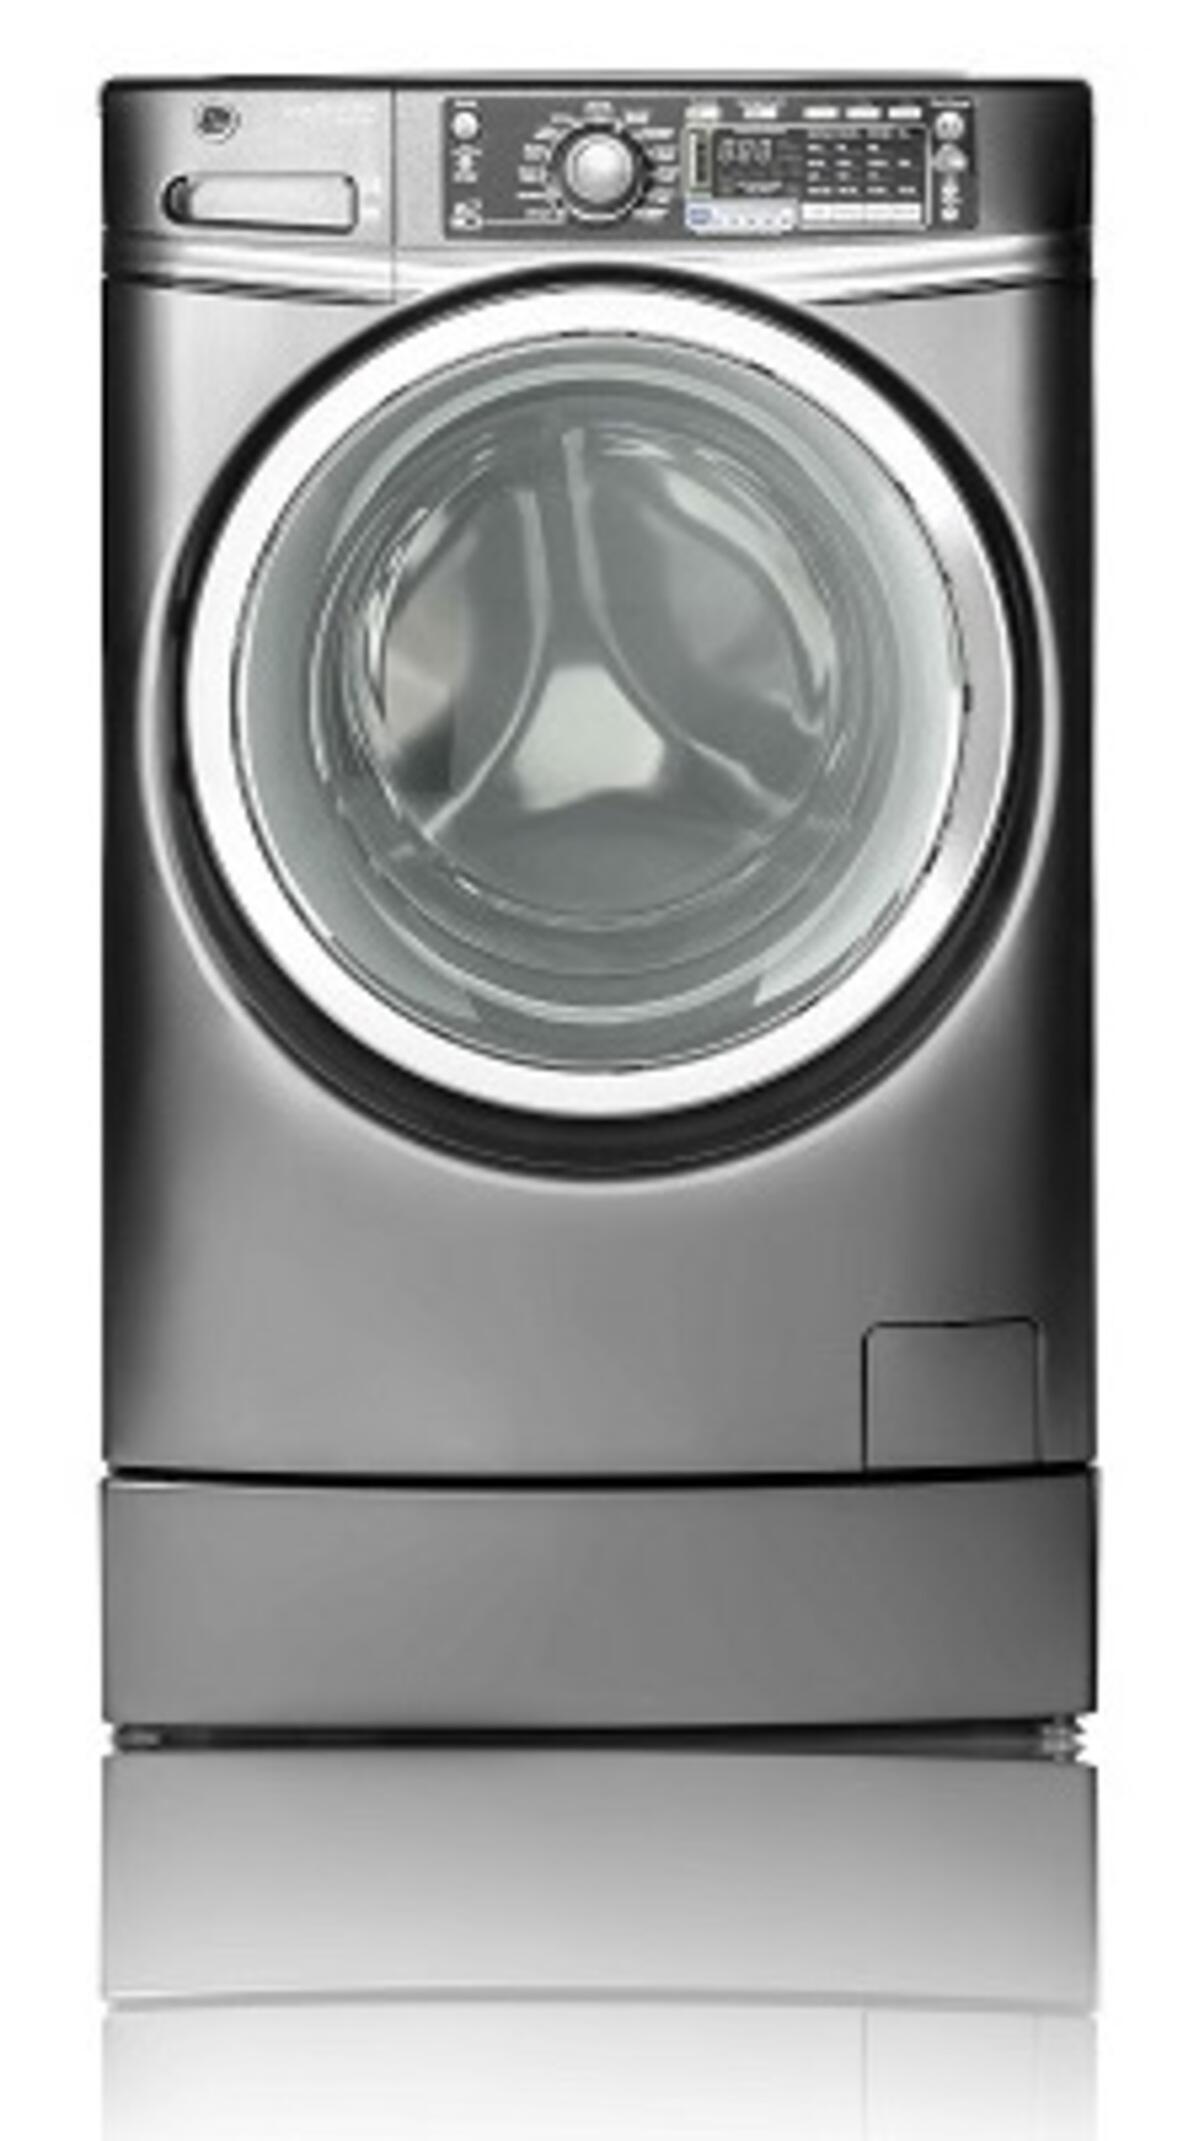 home-clothes-dryer-warranty-coverage-american-home-shield